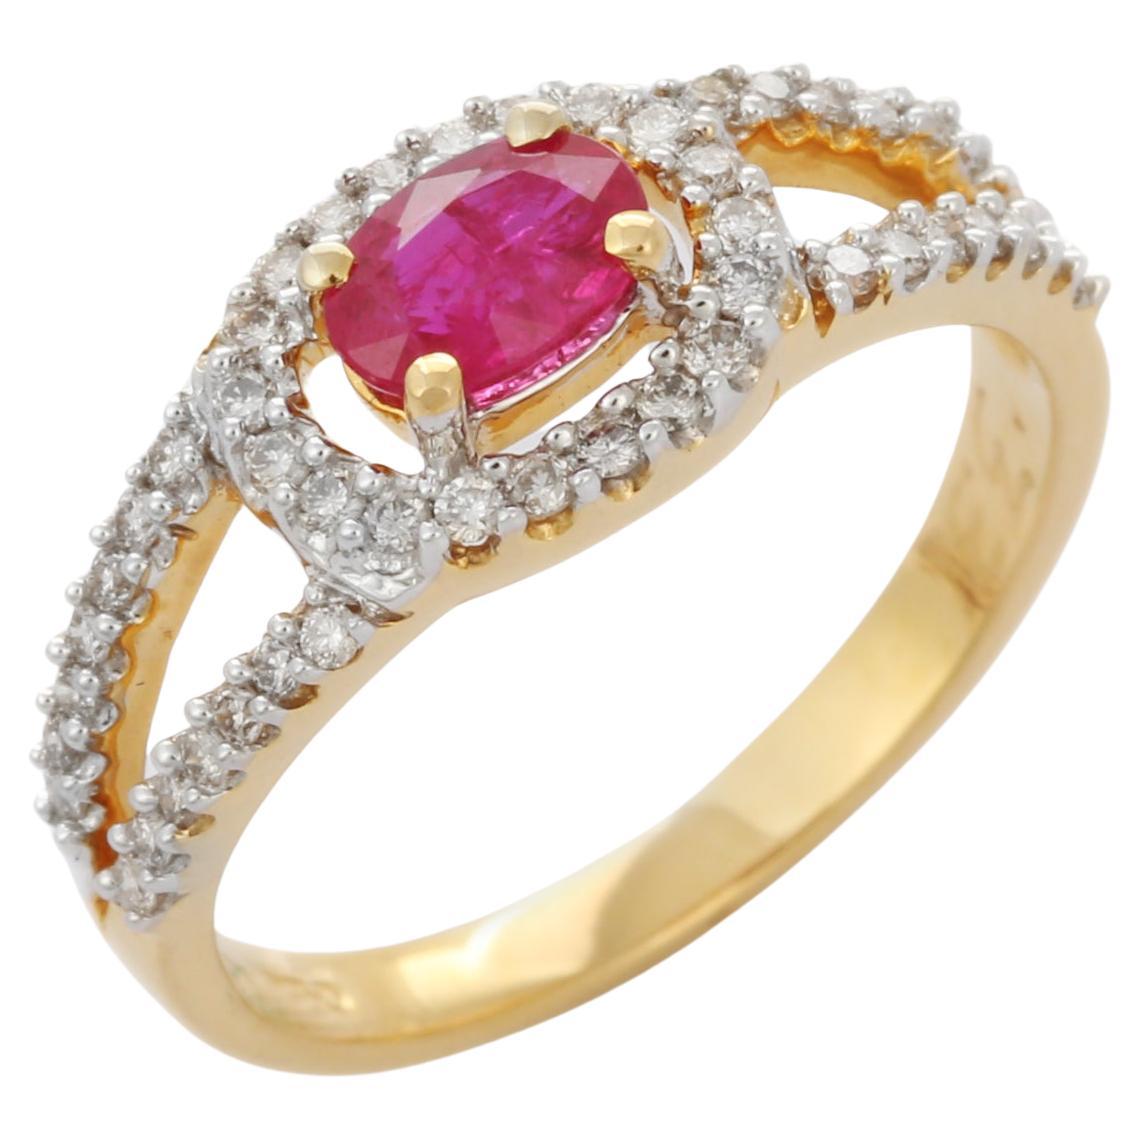 For Sale:  18K Yellow Gold Center Oval Cut Ruby Wedding Ring with Halo of Diamonds 3